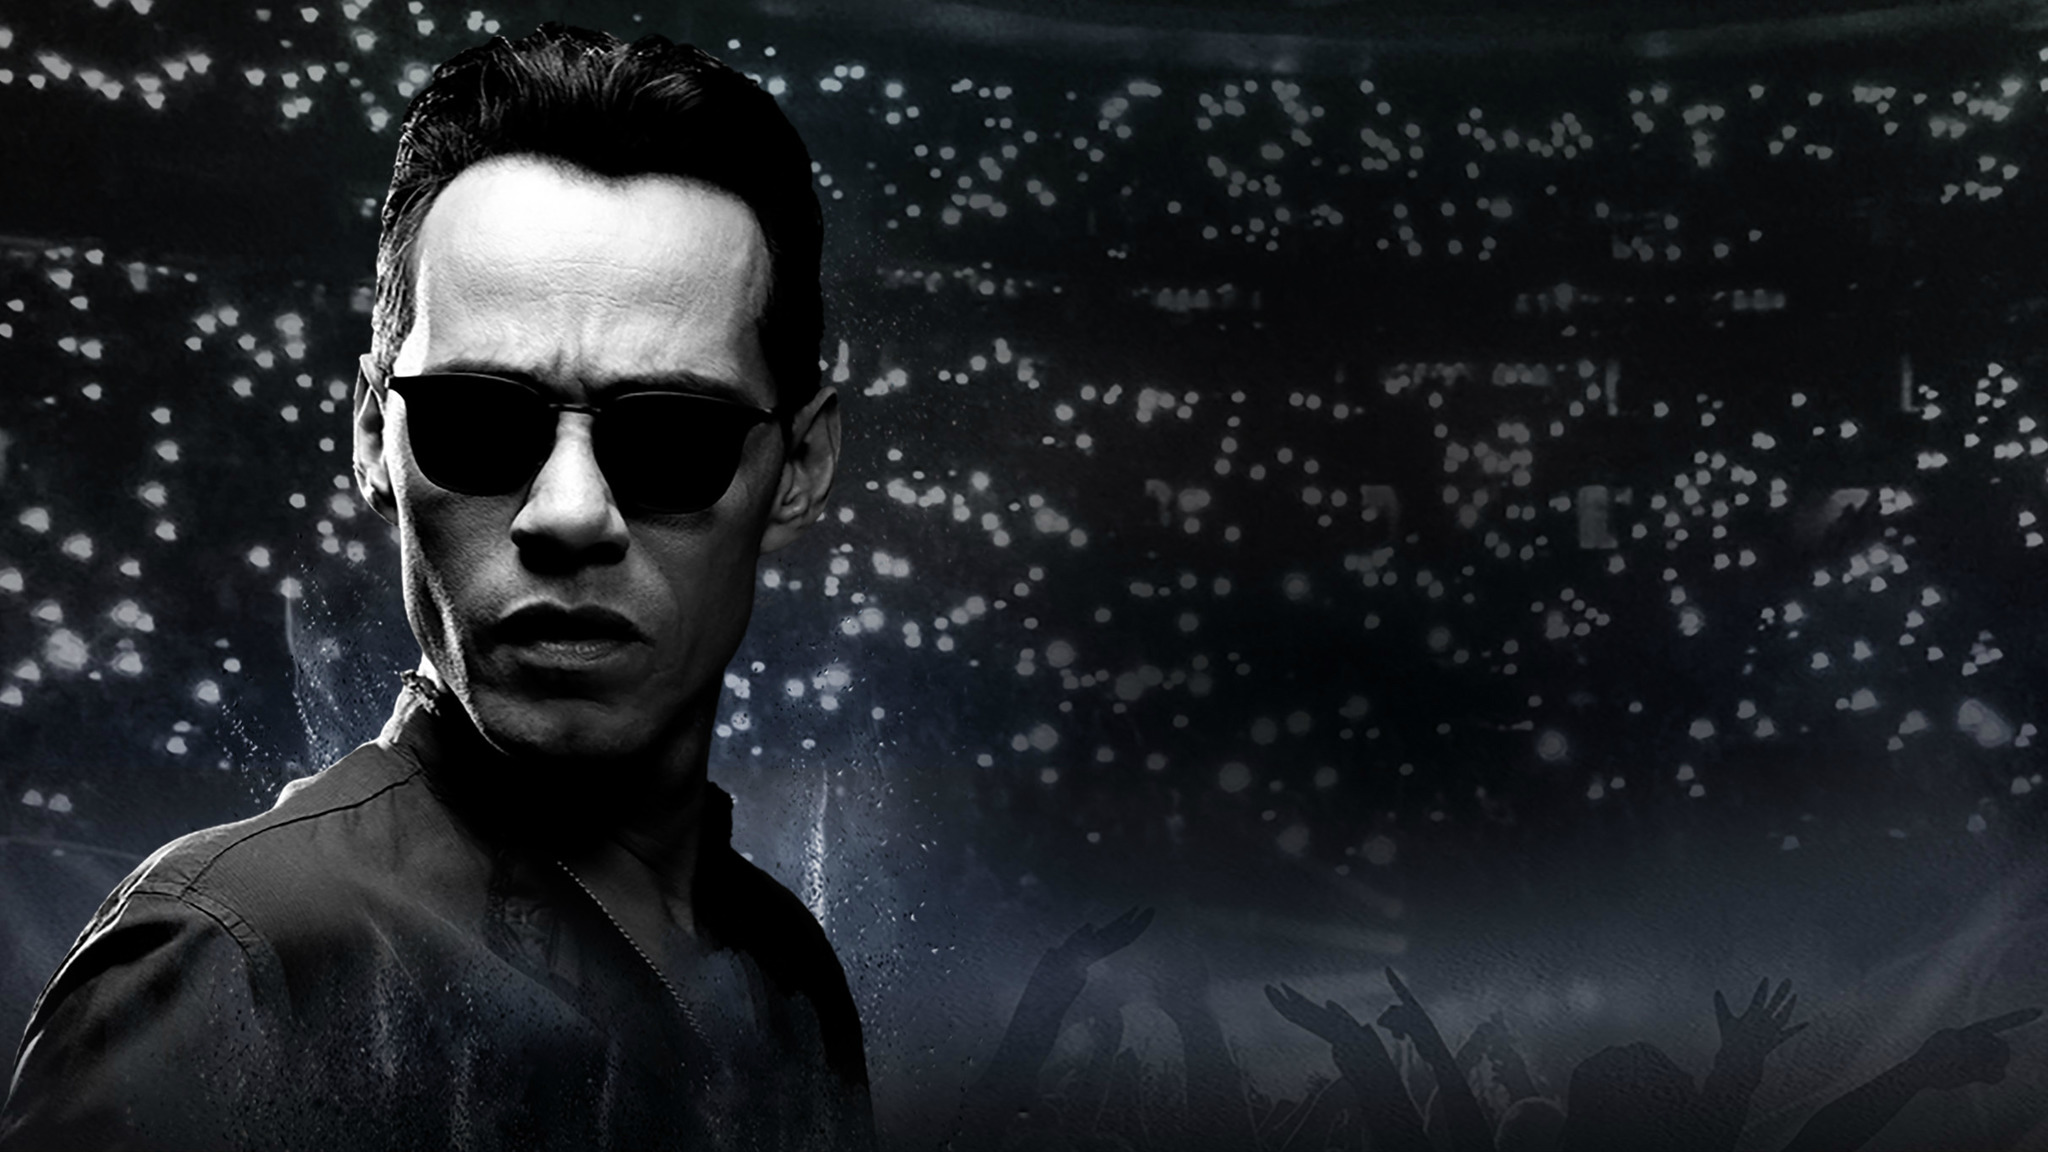 Marc Anthony at Capital One Arena on 22 Feb 2019 Ticket Presale 2048x1152